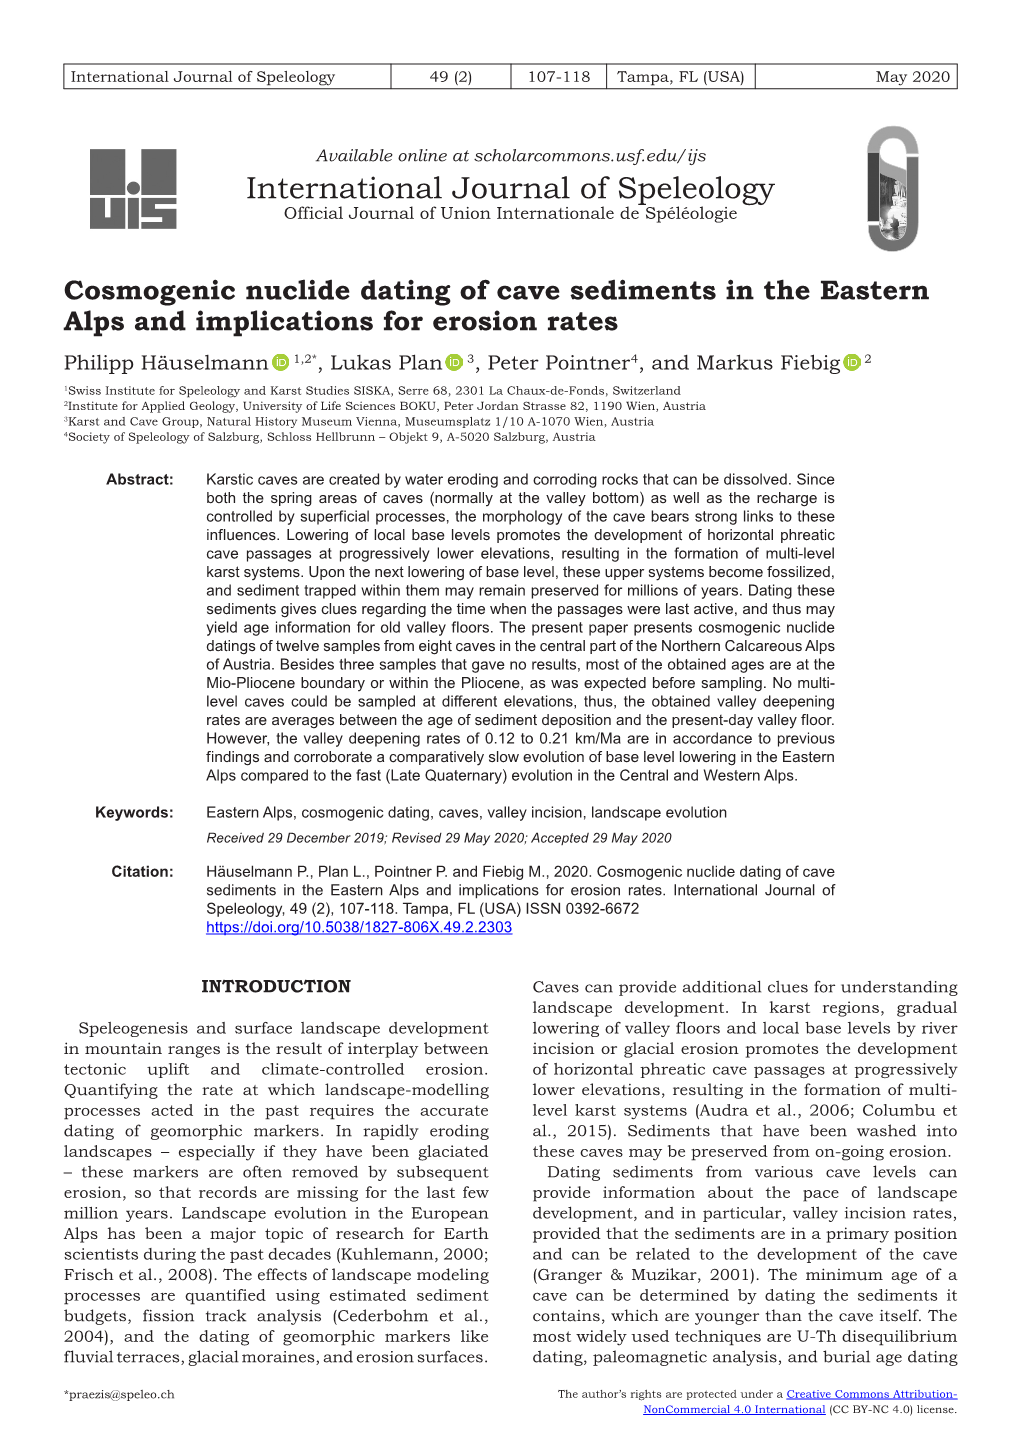 Cosmogenic Nuclide Dating of Cave Sediments in the Eastern Alps And